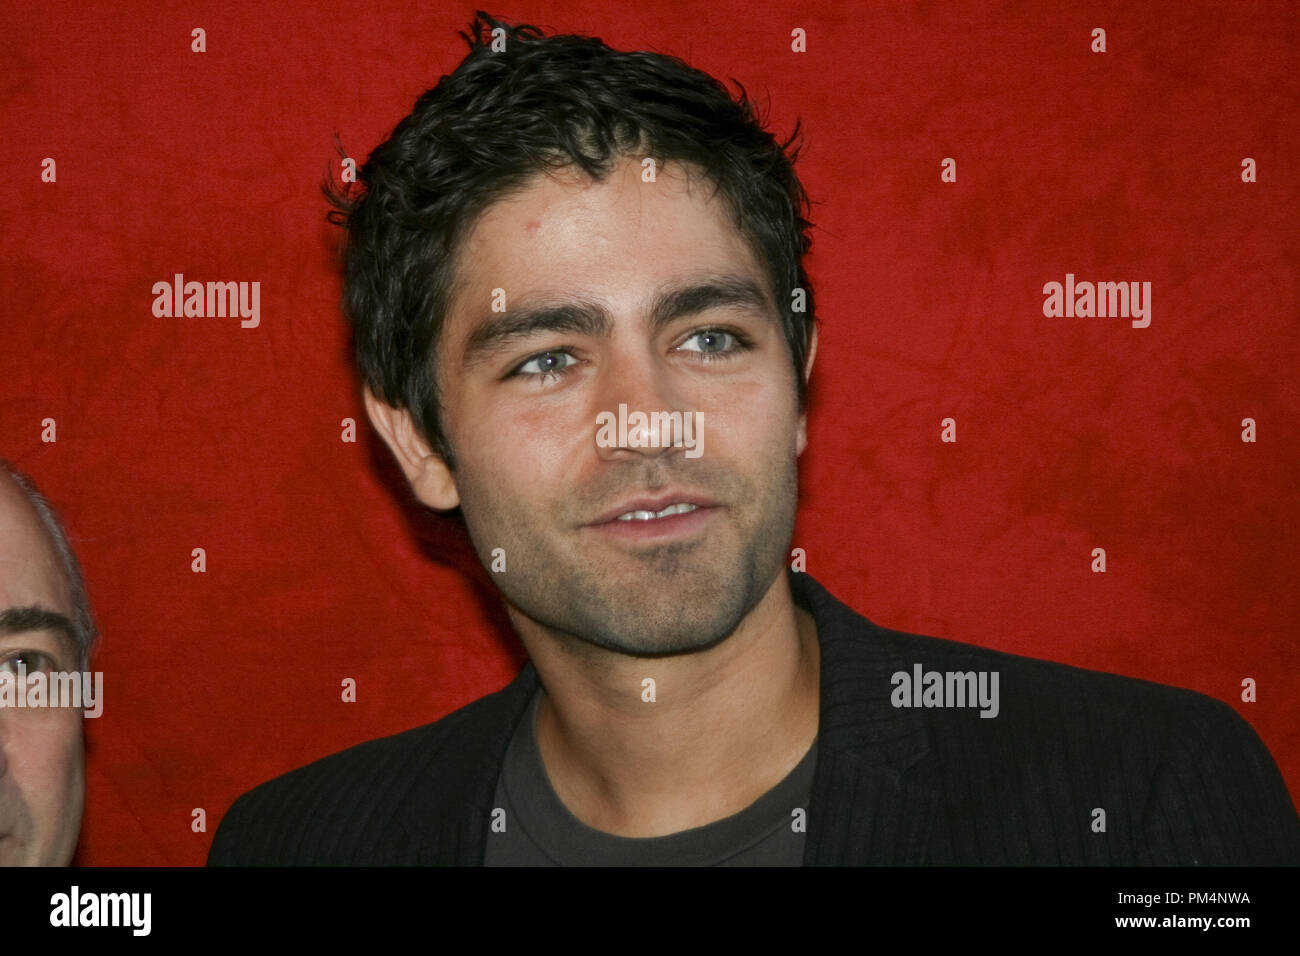 Adrian Grenier 'Teenage Paparazzo' Portrait Session, August 16, 2010.  Reproduction by American tabloids is absolutely forbidden. File Reference # 30445 014JRC  For Editorial Use Only -  All Rights Reserved Stock Photo